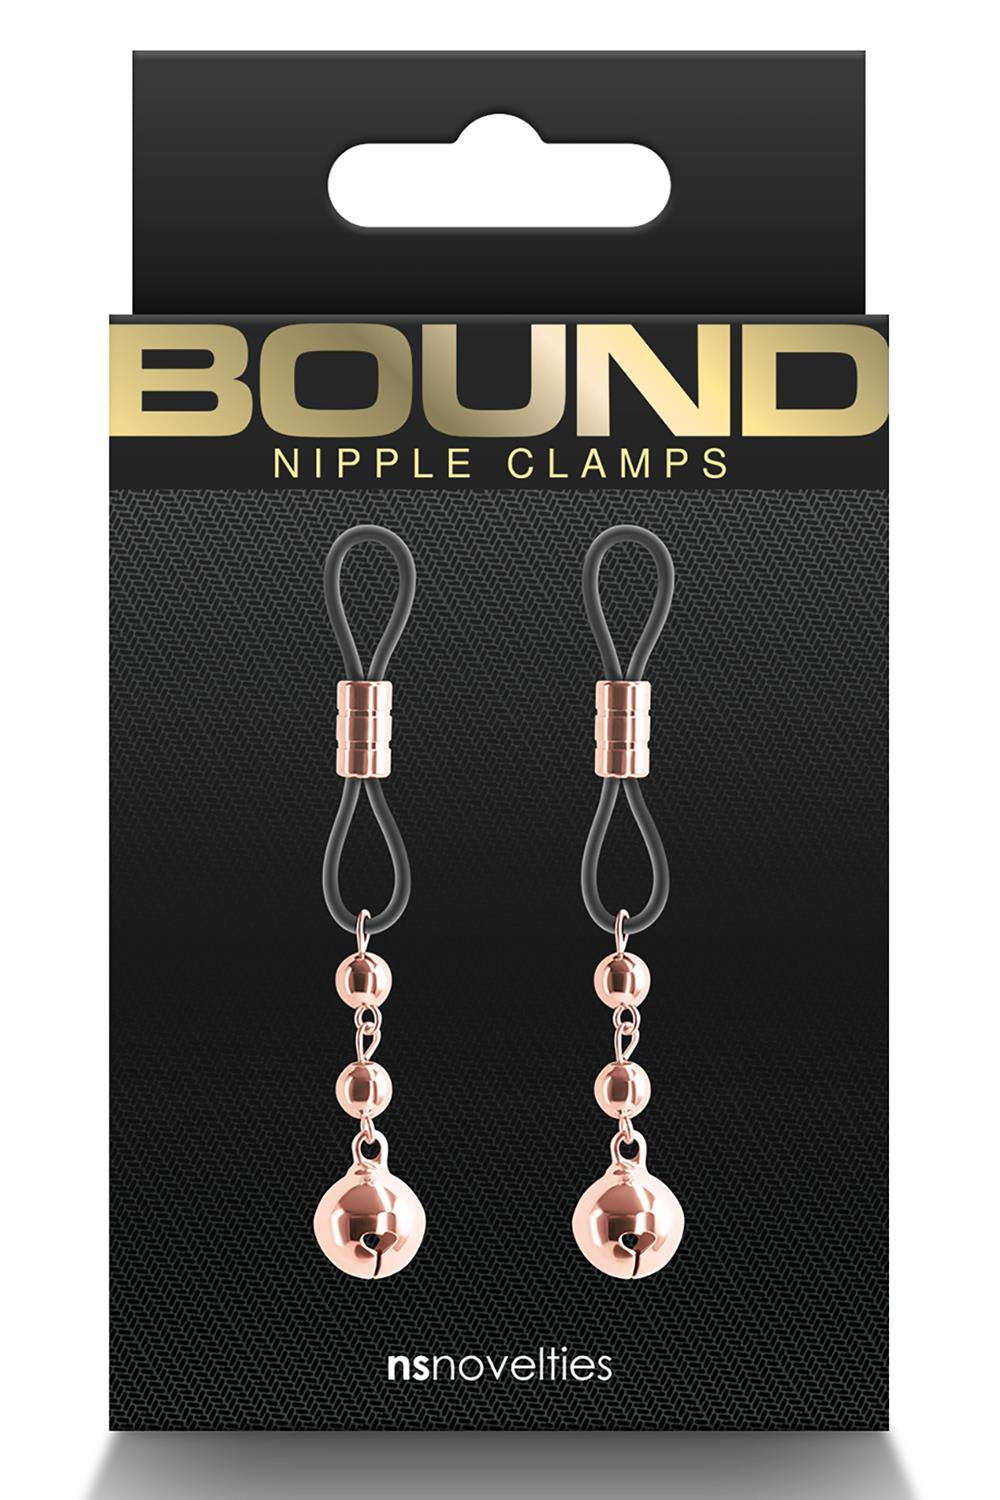 Bound - Nipple Clamps